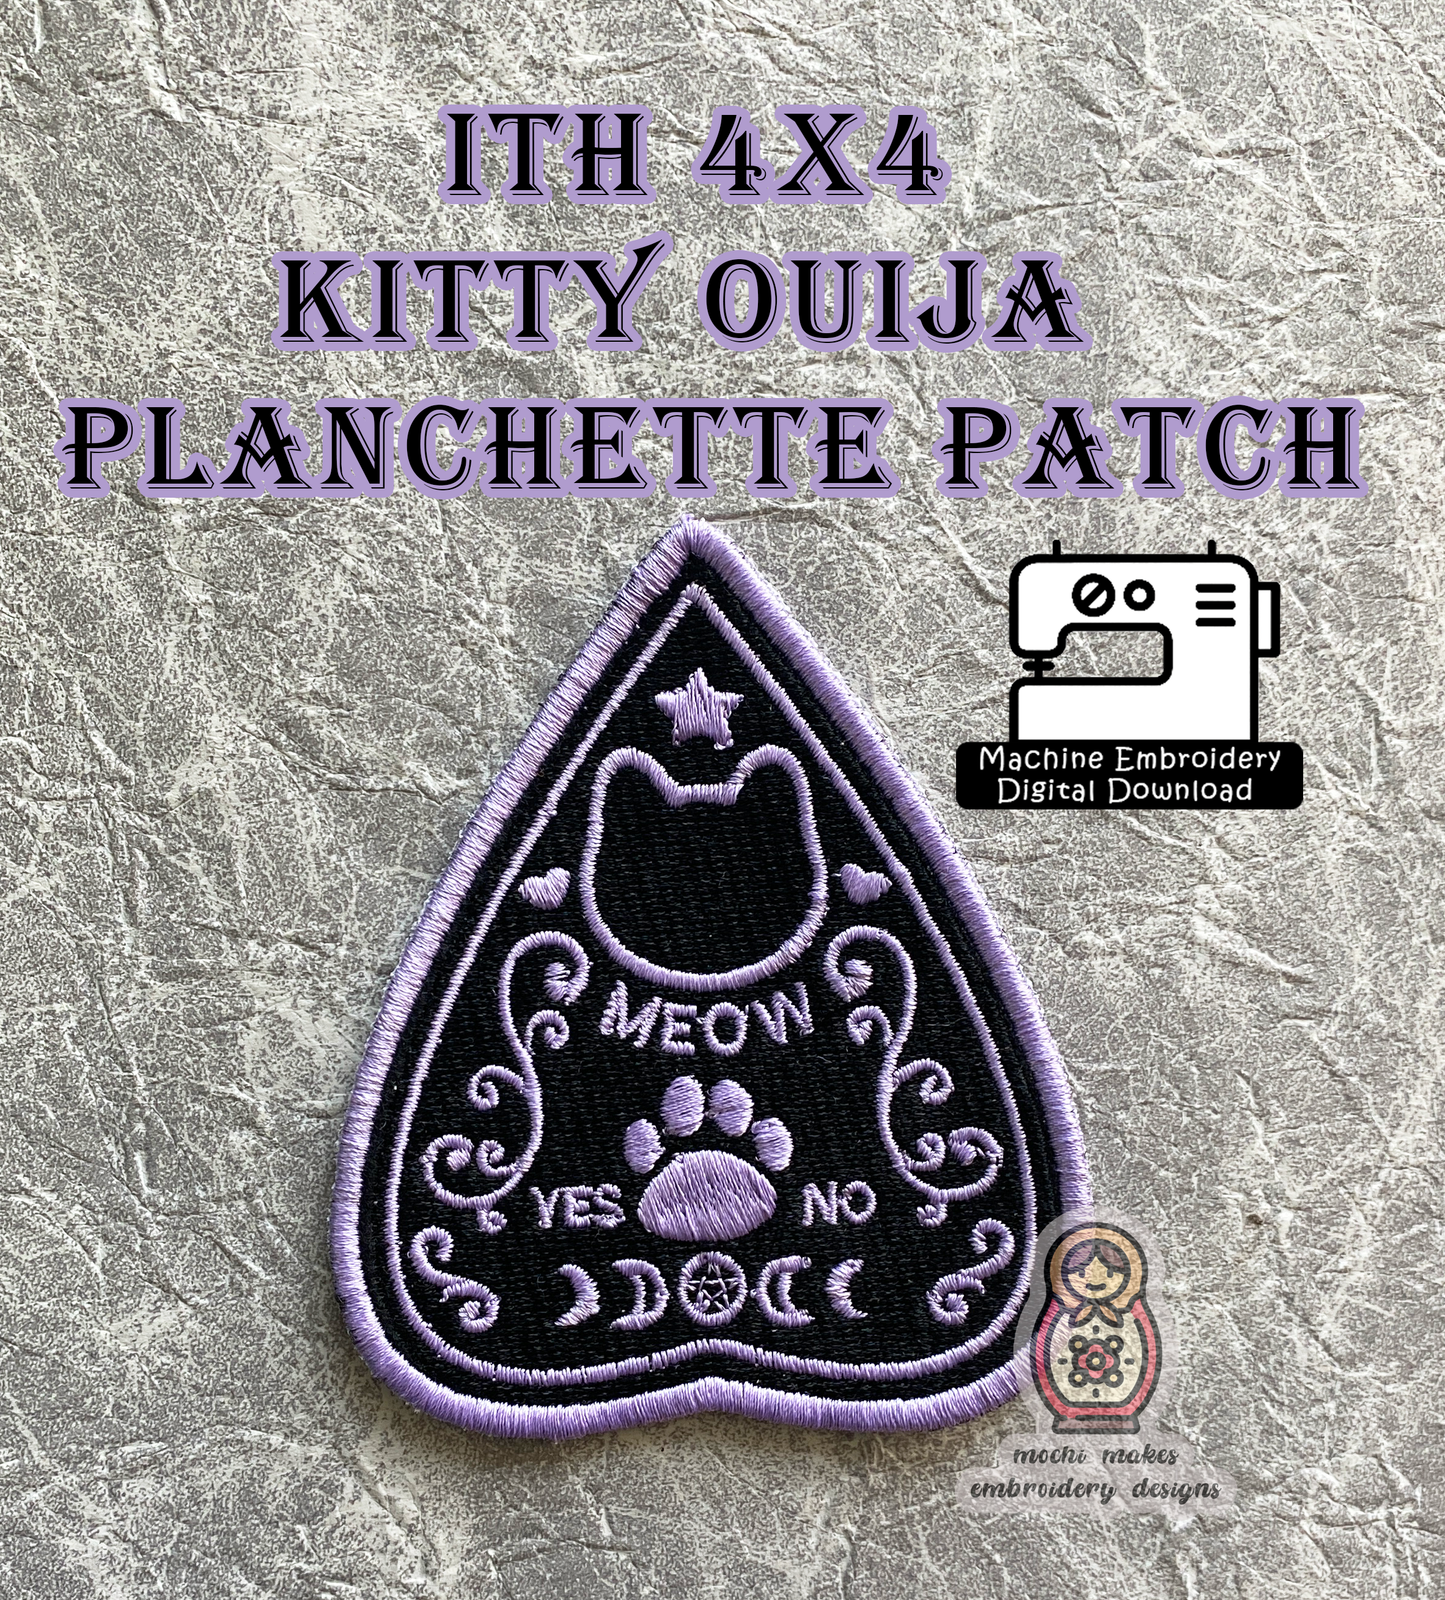 Kitty Ouija Planchette Spooky Halloween Tarot ITH In the hoop 4x4 DIY Digital Download Machine Embroidery Design Horror Kawaii Cat Witch